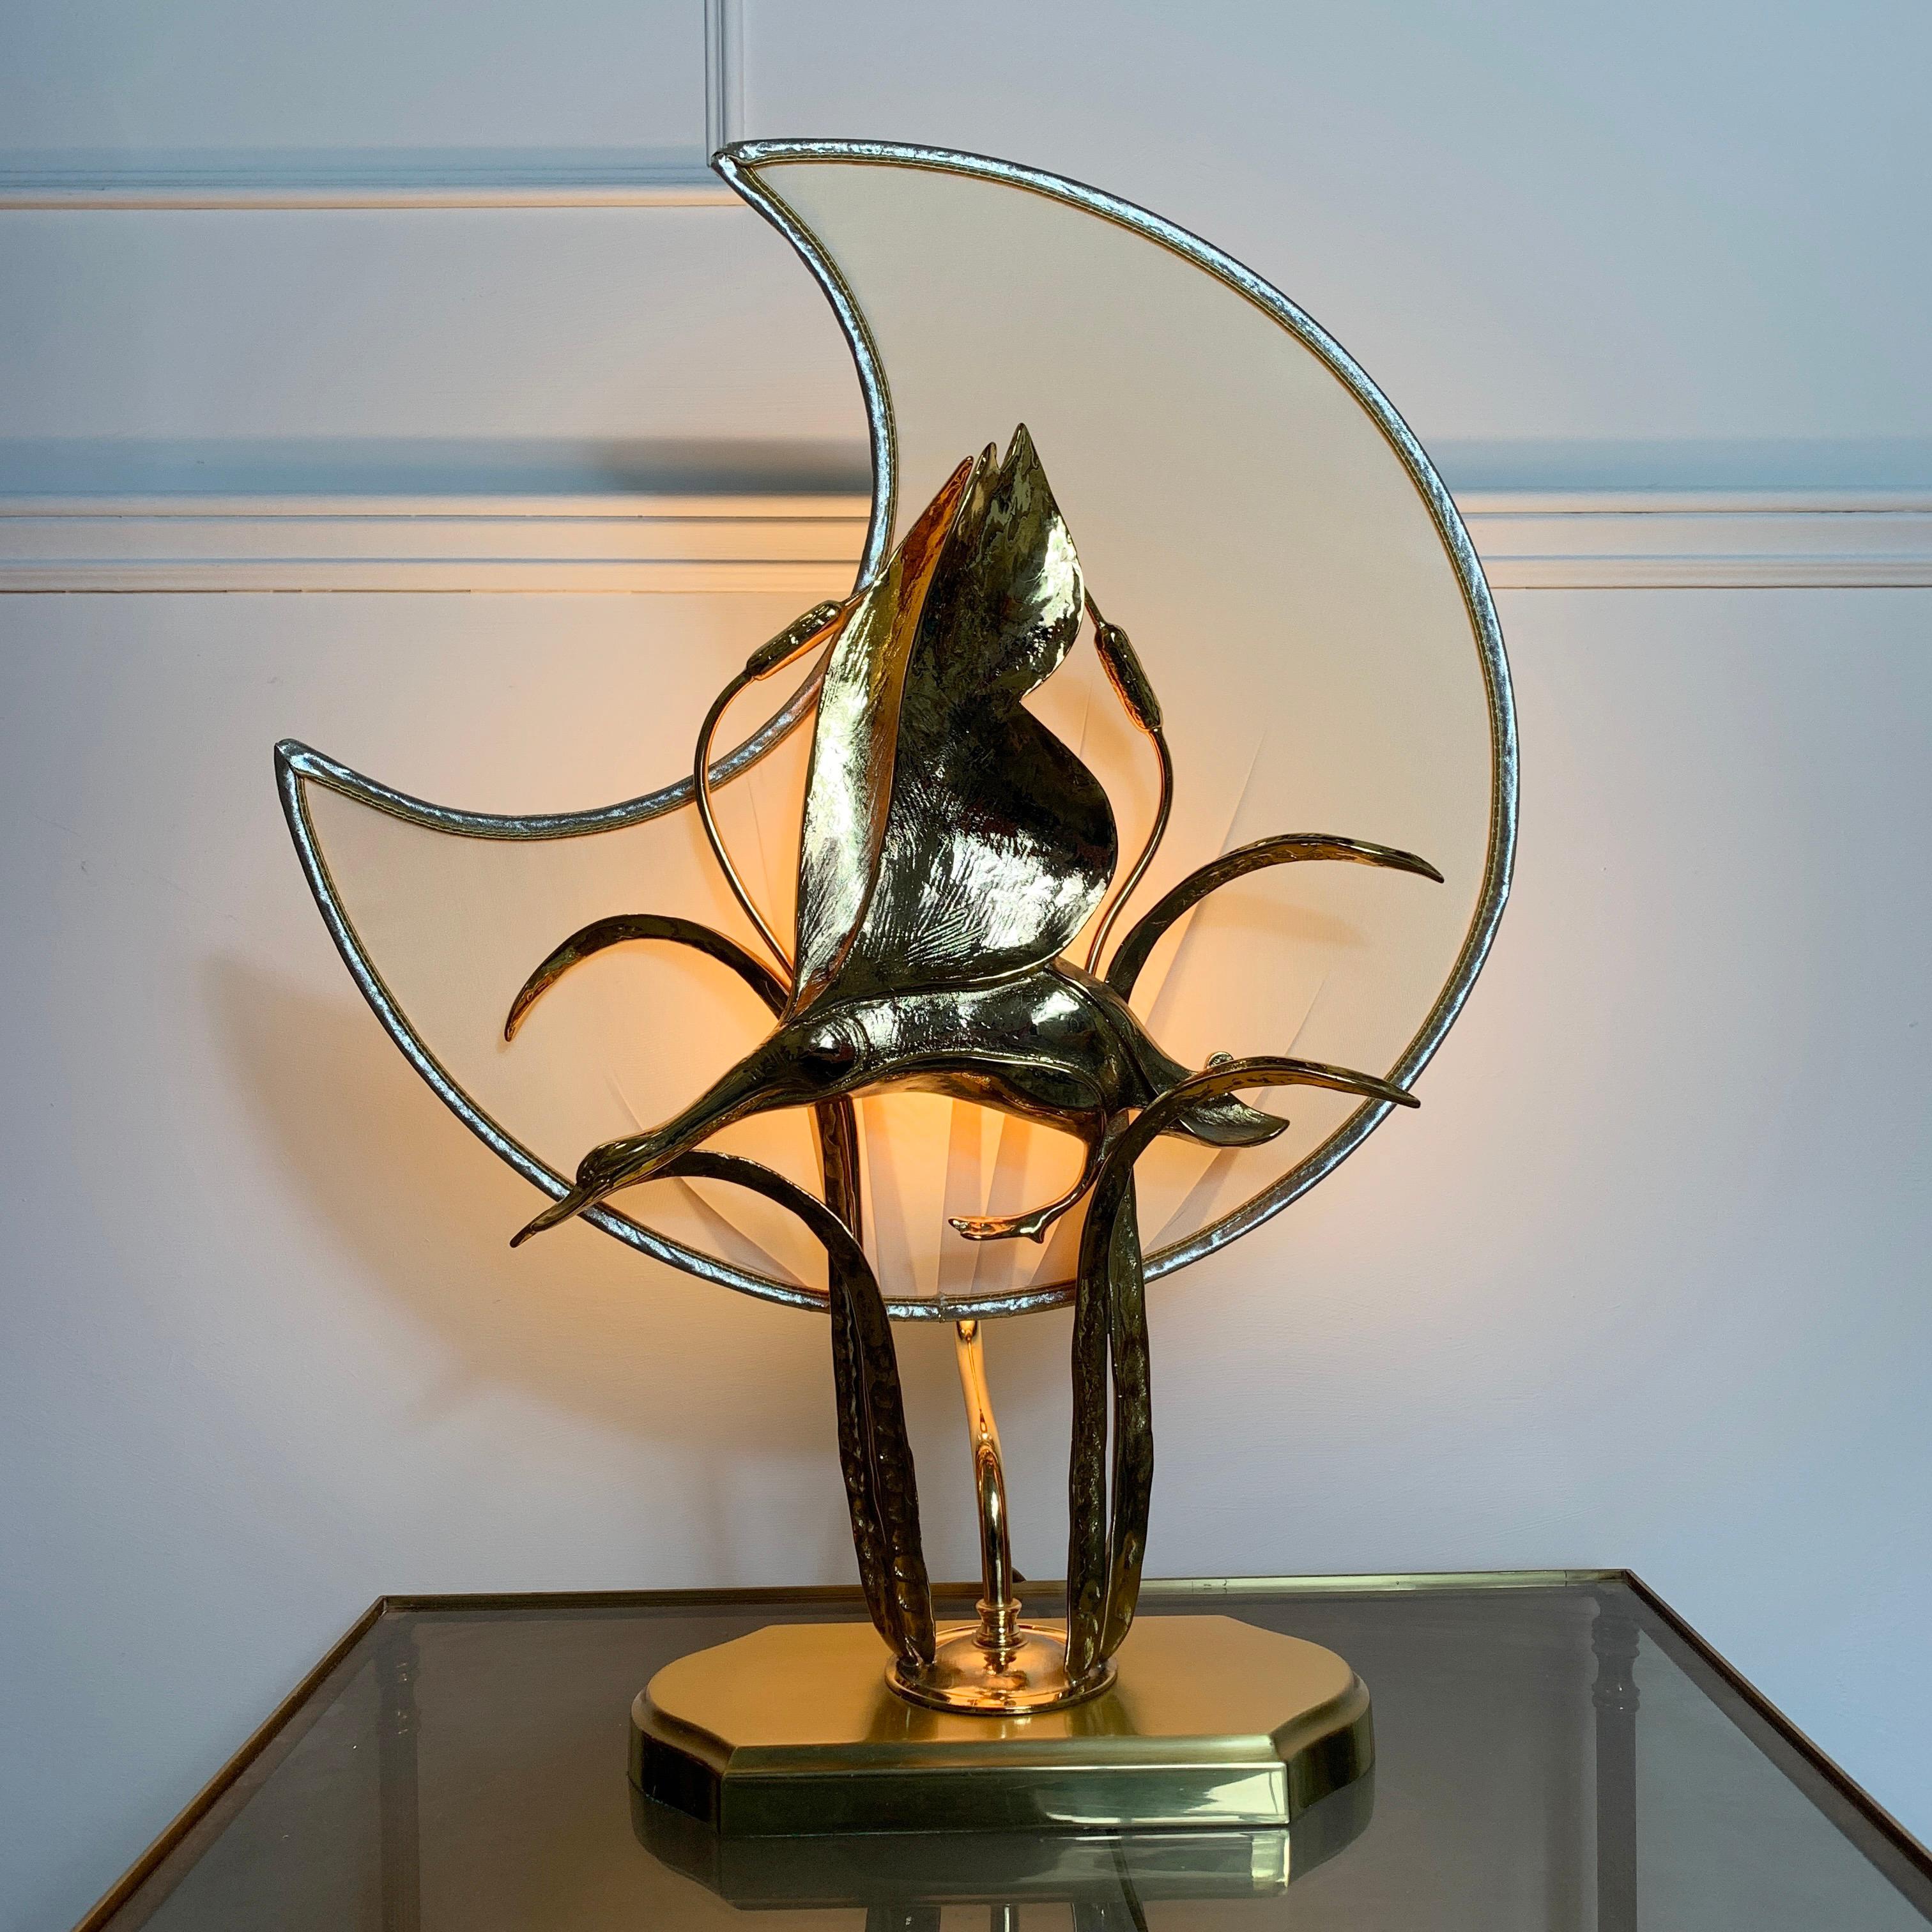 Lanciotto Galeotti, goose and moon table lamp, for Ida Bellini
Vintage gold-plated table lamp depicting a flying goose and bulrushes with a fabulous silken moon shaped shade behind
The goose sculpture is mounted on a brass base, the goose and